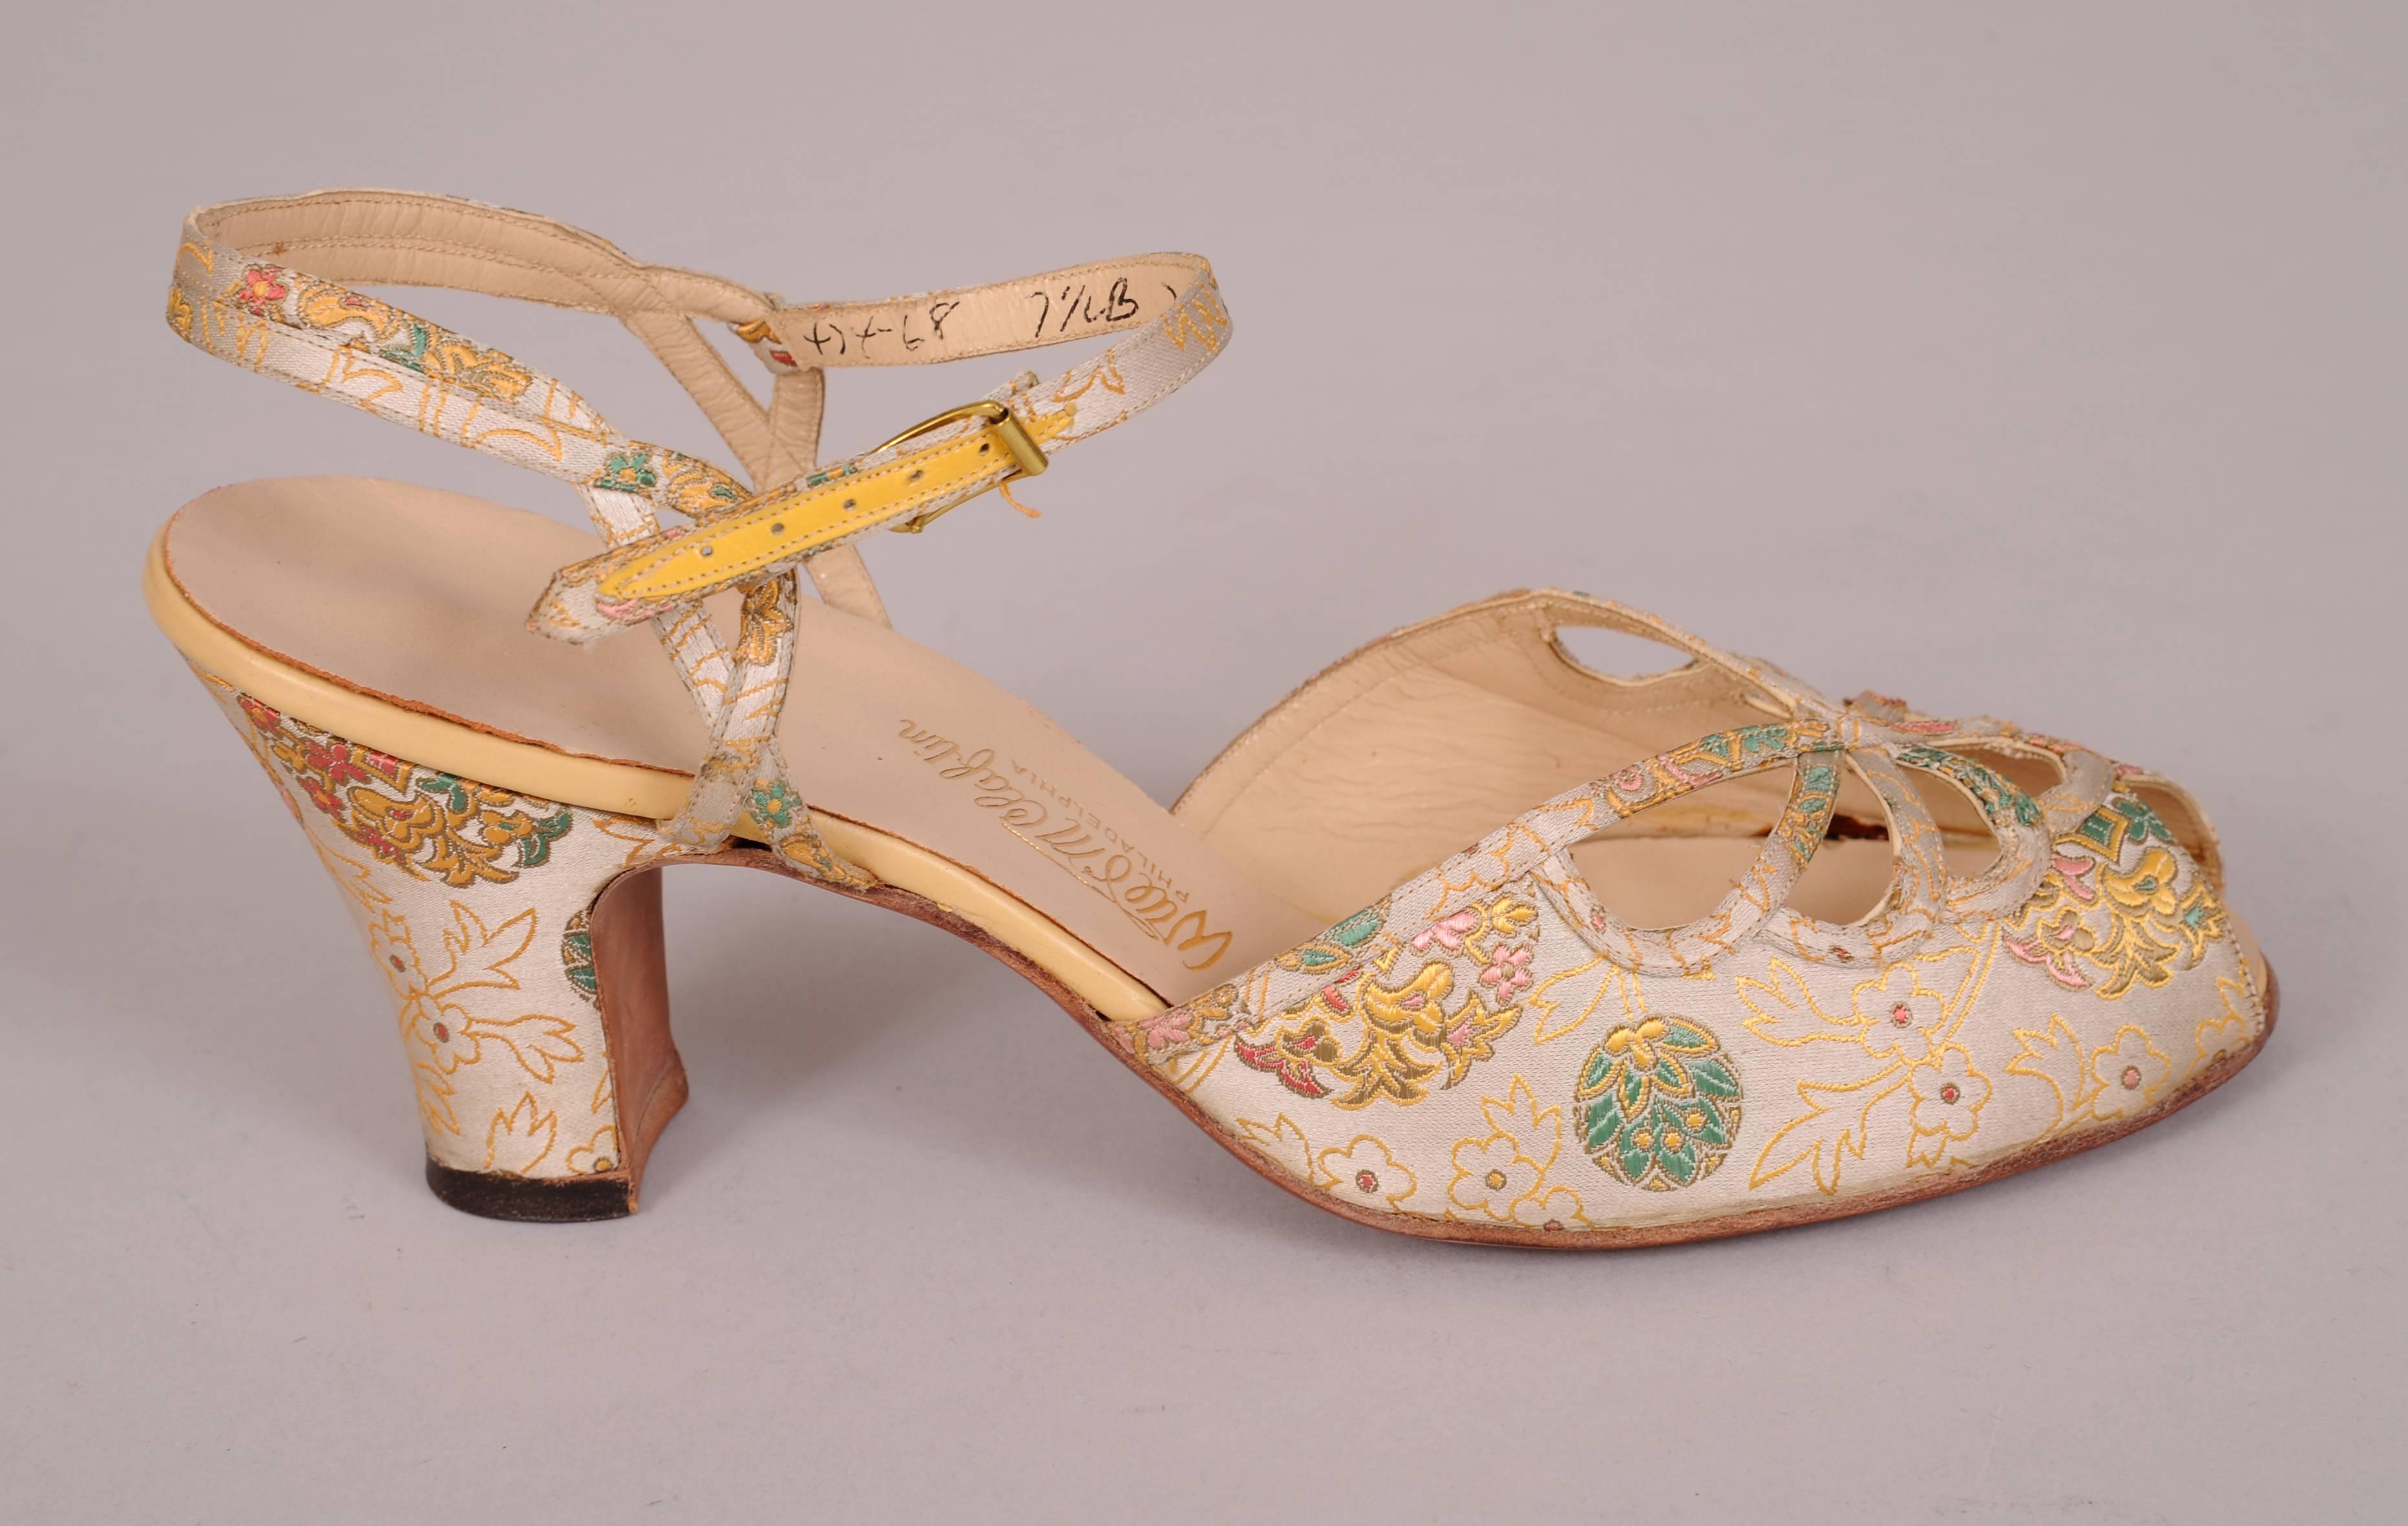 An Asian inspired brocade with a cream background and metallic gold, green, pink and red designs is used for these peep toe heels with a lattice work design which is repeated on the ankle strap. Never worn, they are in excellent condition, marked a